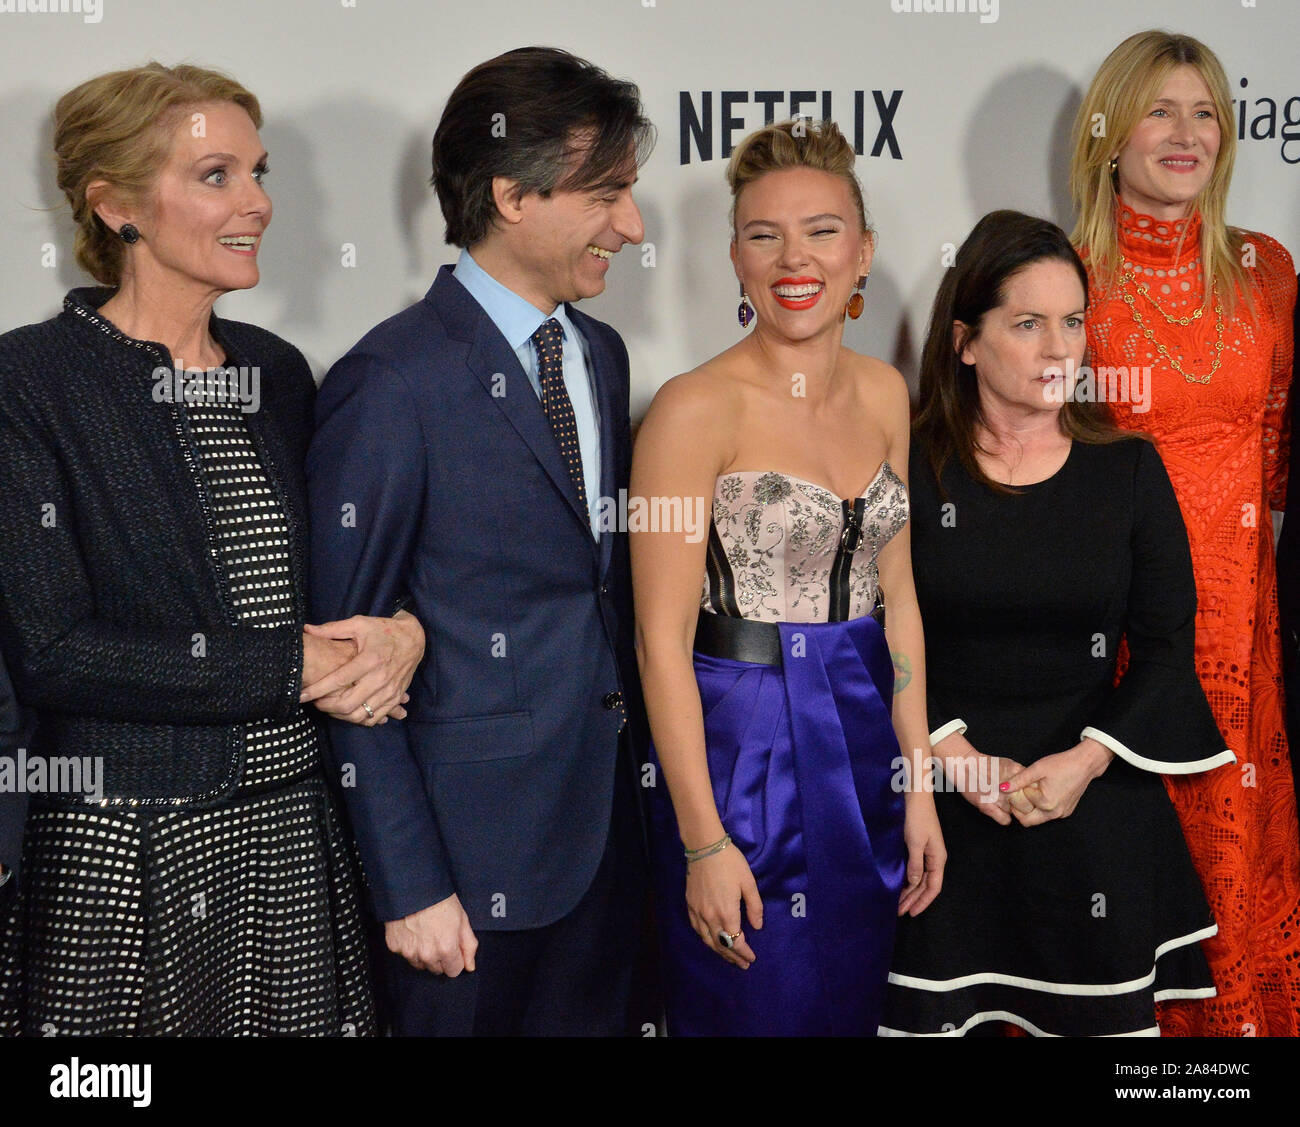 Los Angeles, United States. 05th Nov, 2019. Director Noah Baumbach, (2nd-L) joins cast members Julie Hagerty, Scarlett Johansson, Martha Kelly, and Laura Dern (L-R) for a photo-op during the premiere of the motion picture romantic comedy 'Marriage Story' at the DGA Theatre in Los Angeles on Tuesday, November 5, 2019. Storyline: The film is Academy Award nominated filmmaker Noah Baumbach's incisive and compassionate look at a marriage breaking up and a family staying together. Photo by Jim Ruymen/UPI Credit: UPI/Alamy Live News Stock Photo